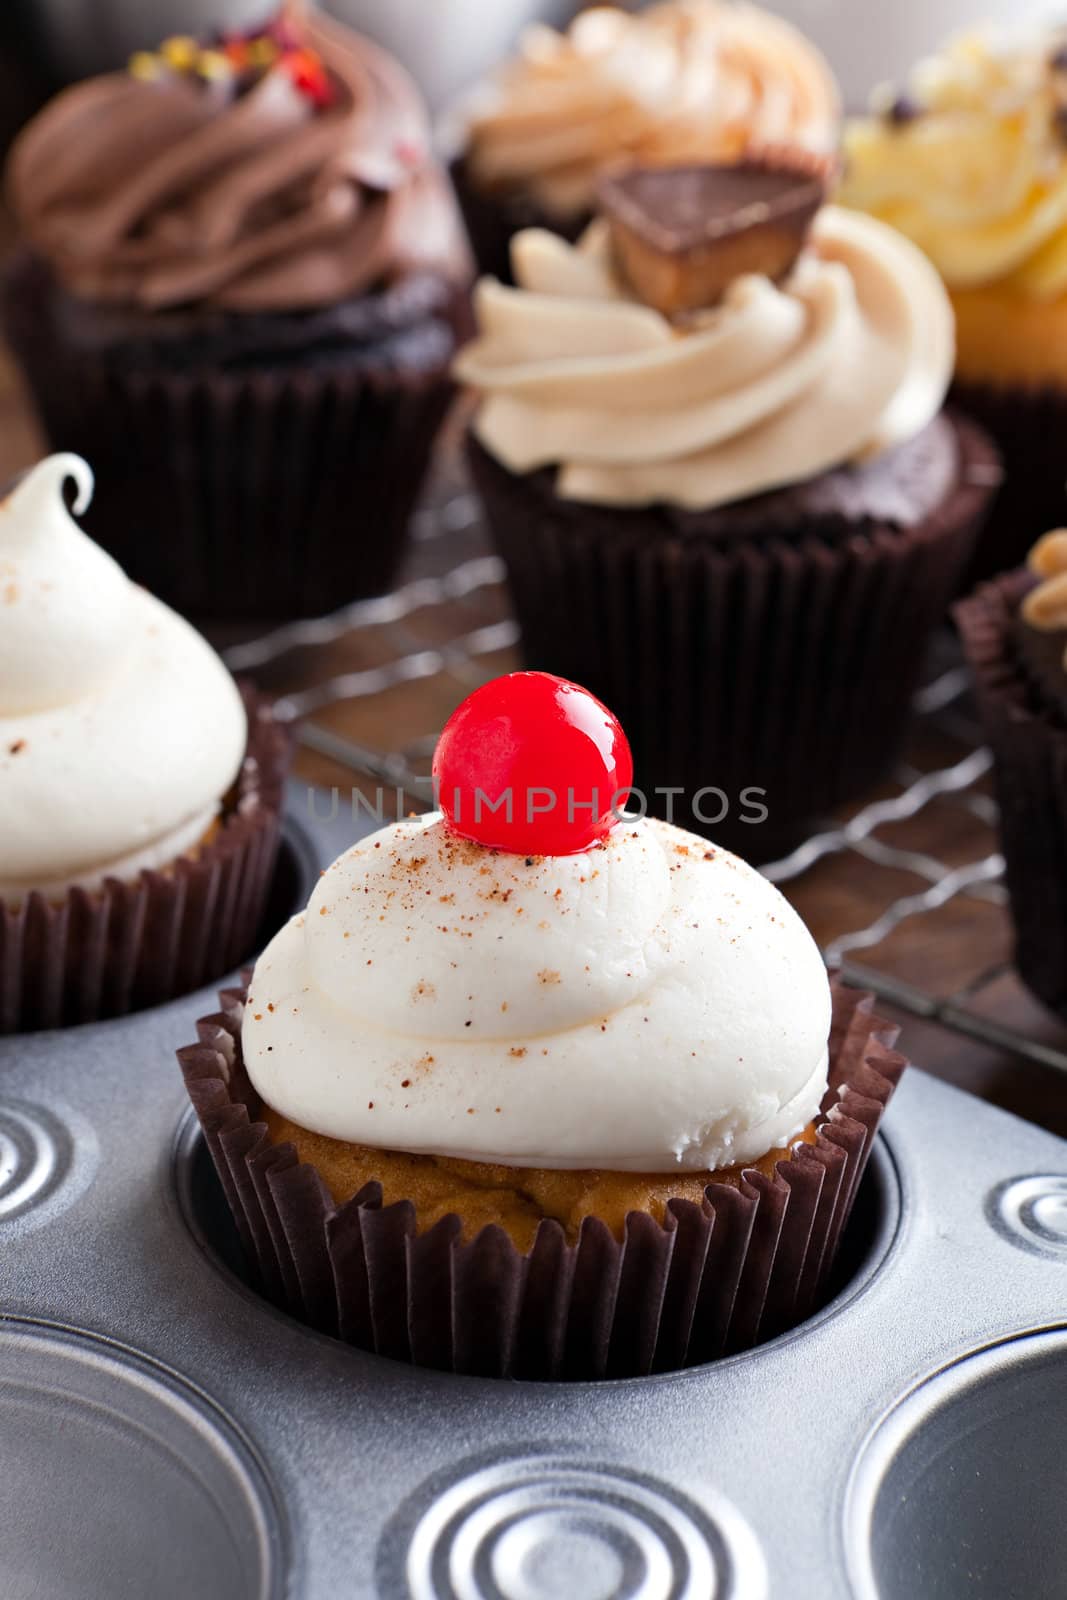 Close up of some decadent gourmet cupcakes frosted with a variety of icing flavors and toppings.